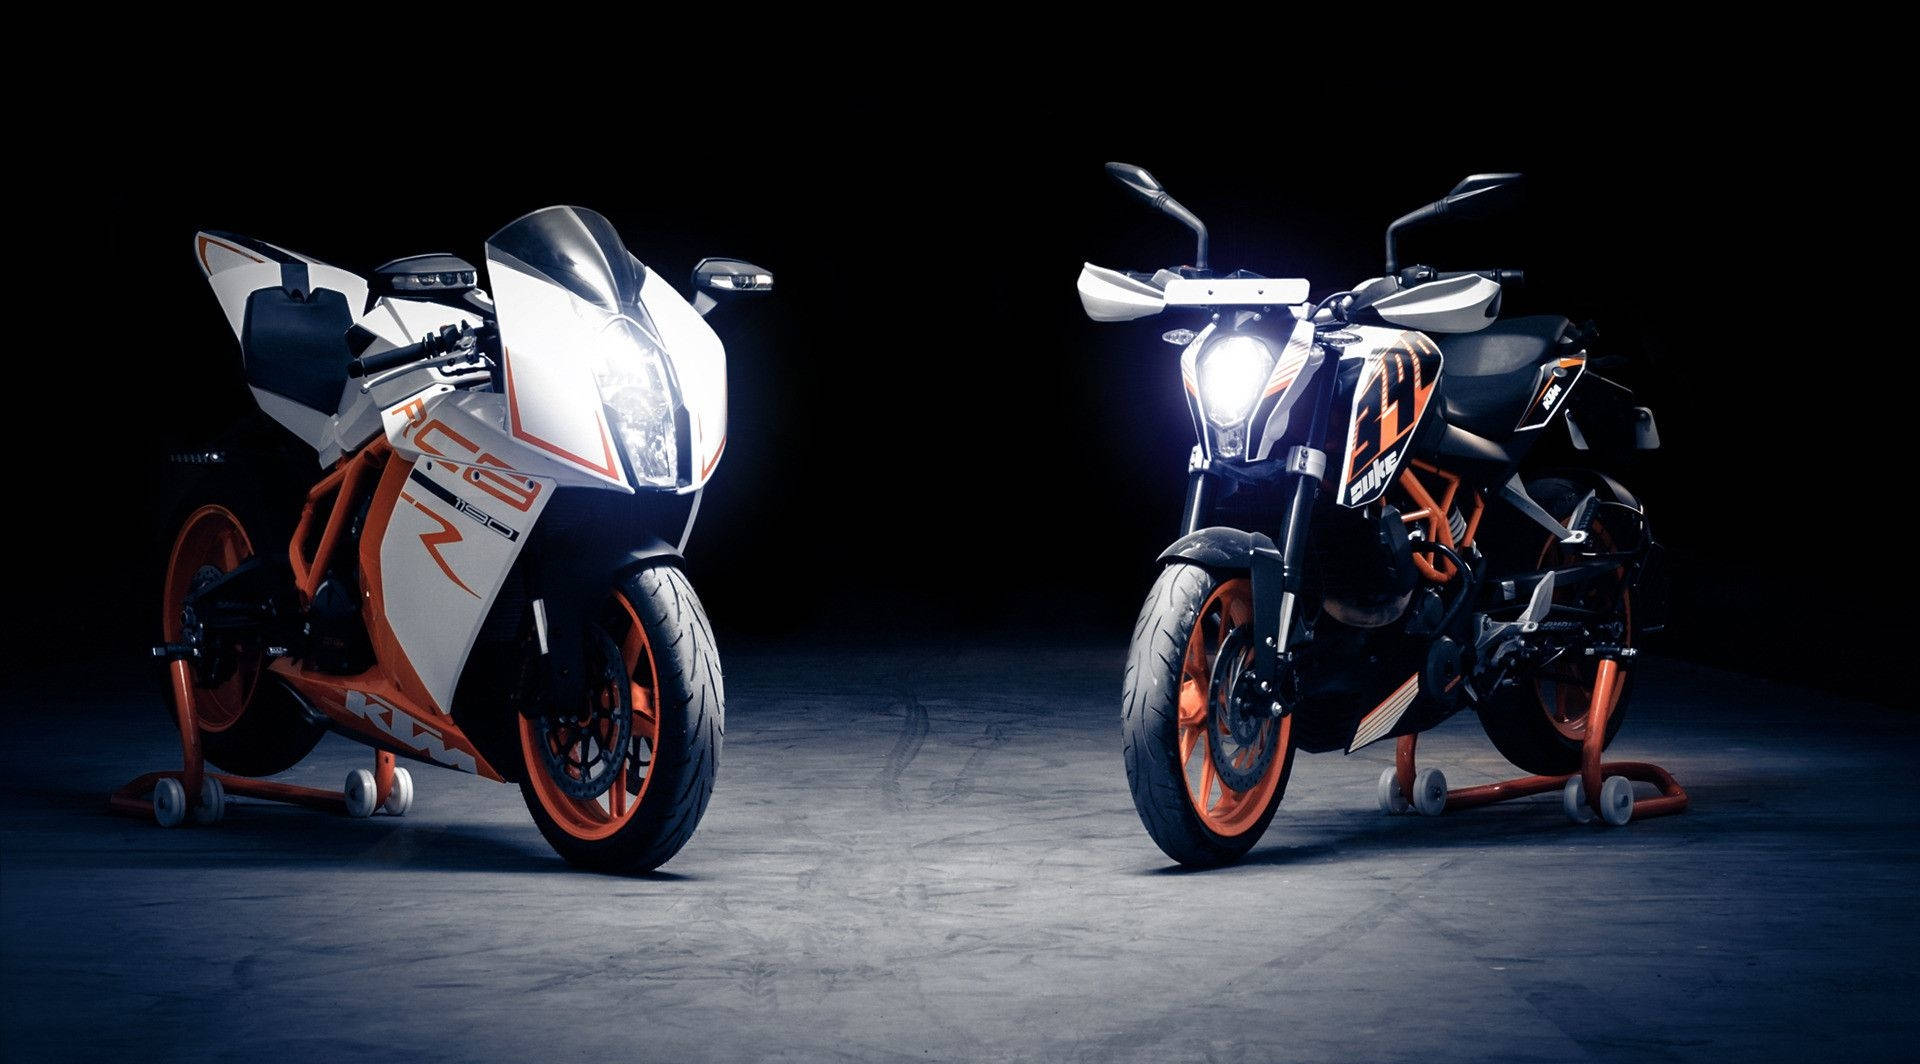 The Dynamic Duo - Ktm Duke 390 & Ktm 1190 Rc8 In Raw Action